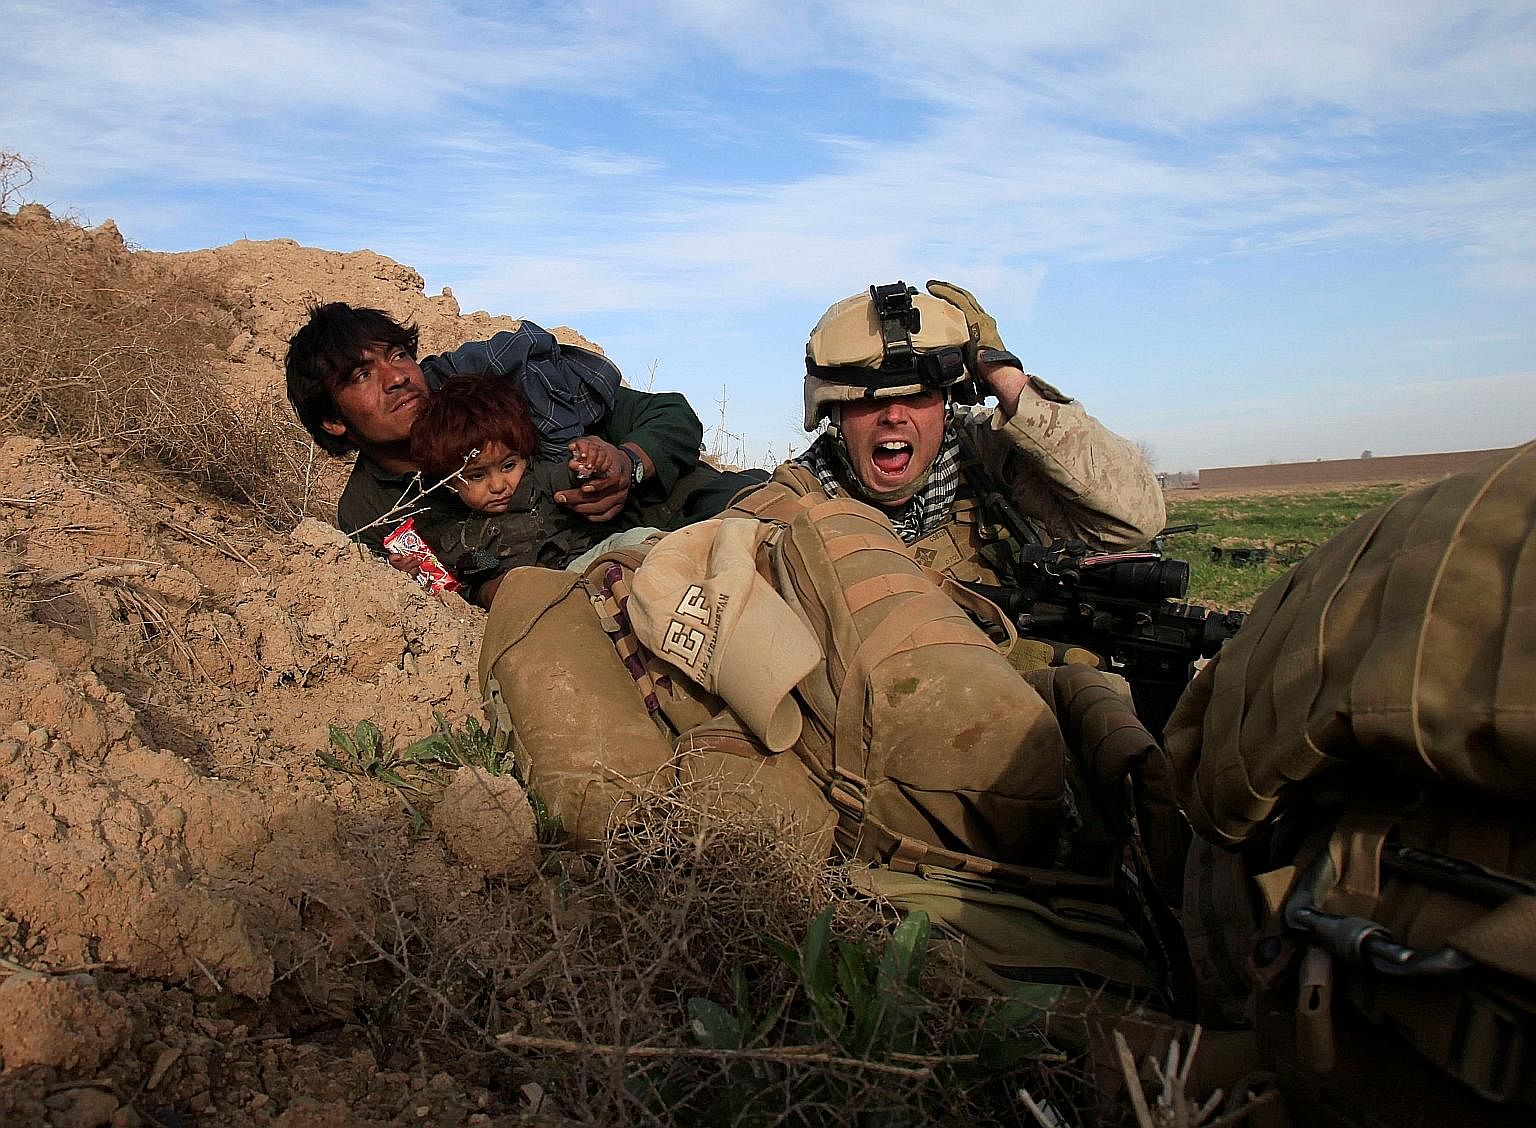 In this photo taken in 2010, a US Marine protects an Afghan man and his child after Taleban fighters opened fire in the Afghan town of Marjah.